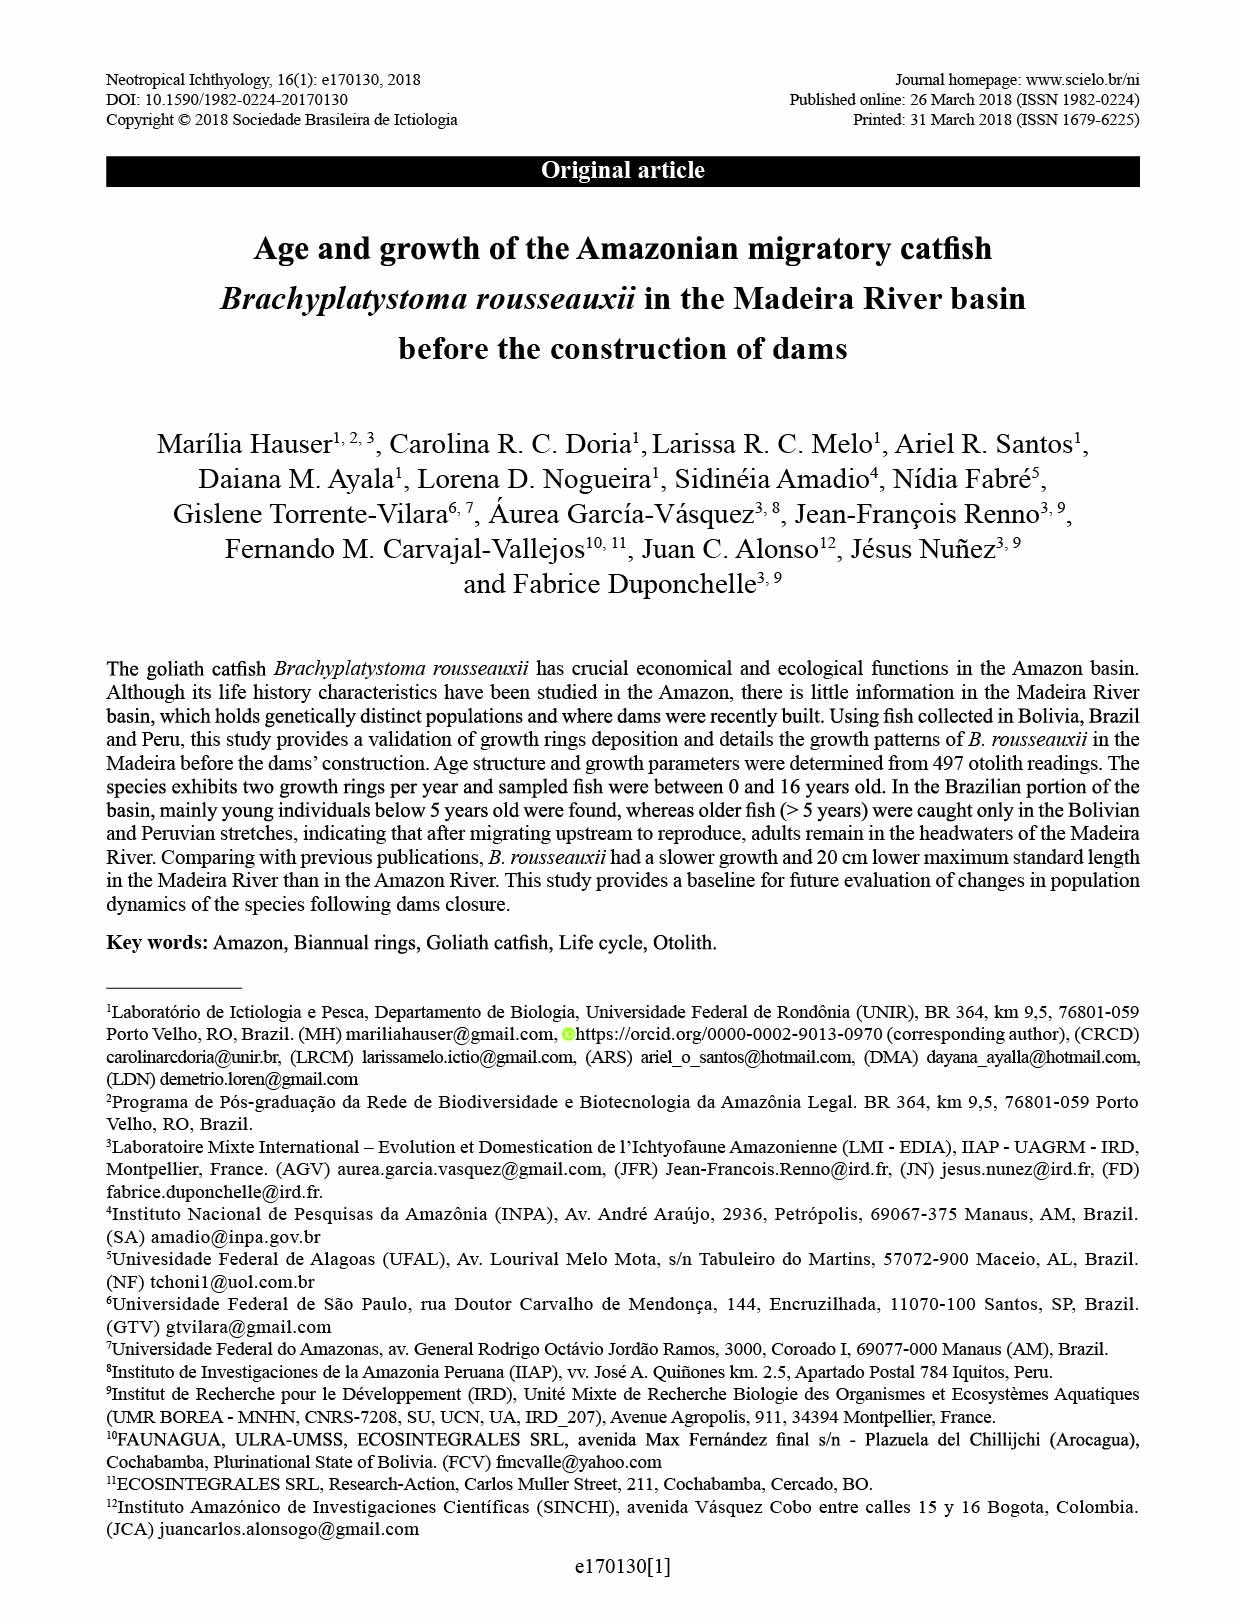 Hauser_2018_Age and growth dorado_NeotropicalIchthyology_tapa